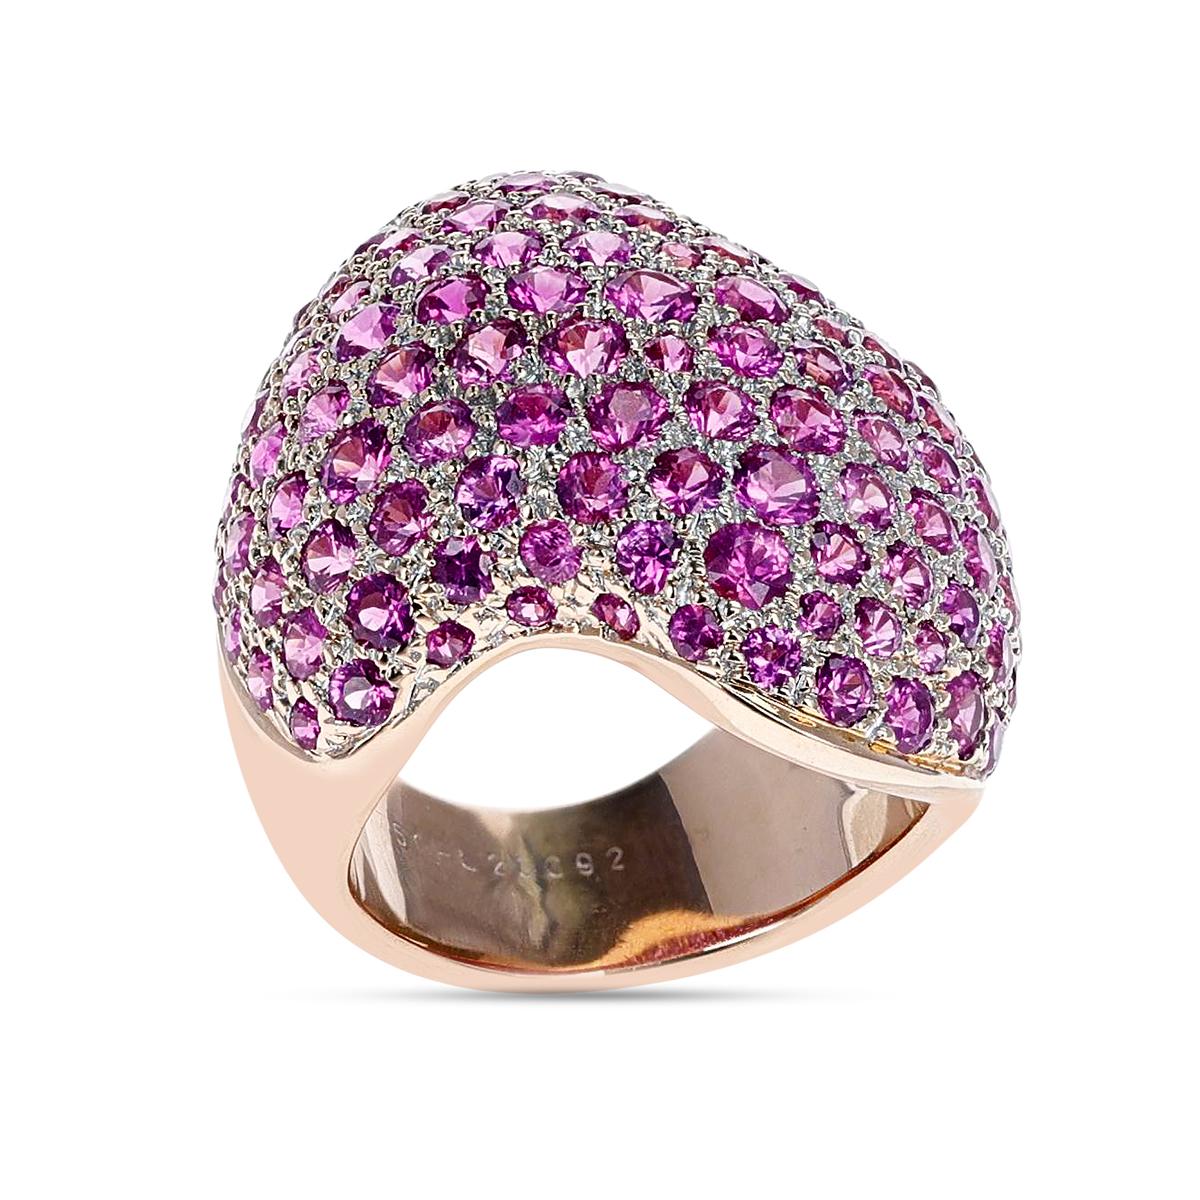 Round Cut Van Cleef & Arpels 6.10 Ct. Pink Sapphire Swerve Cocktail Ring, 18K Rose Gold For Sale